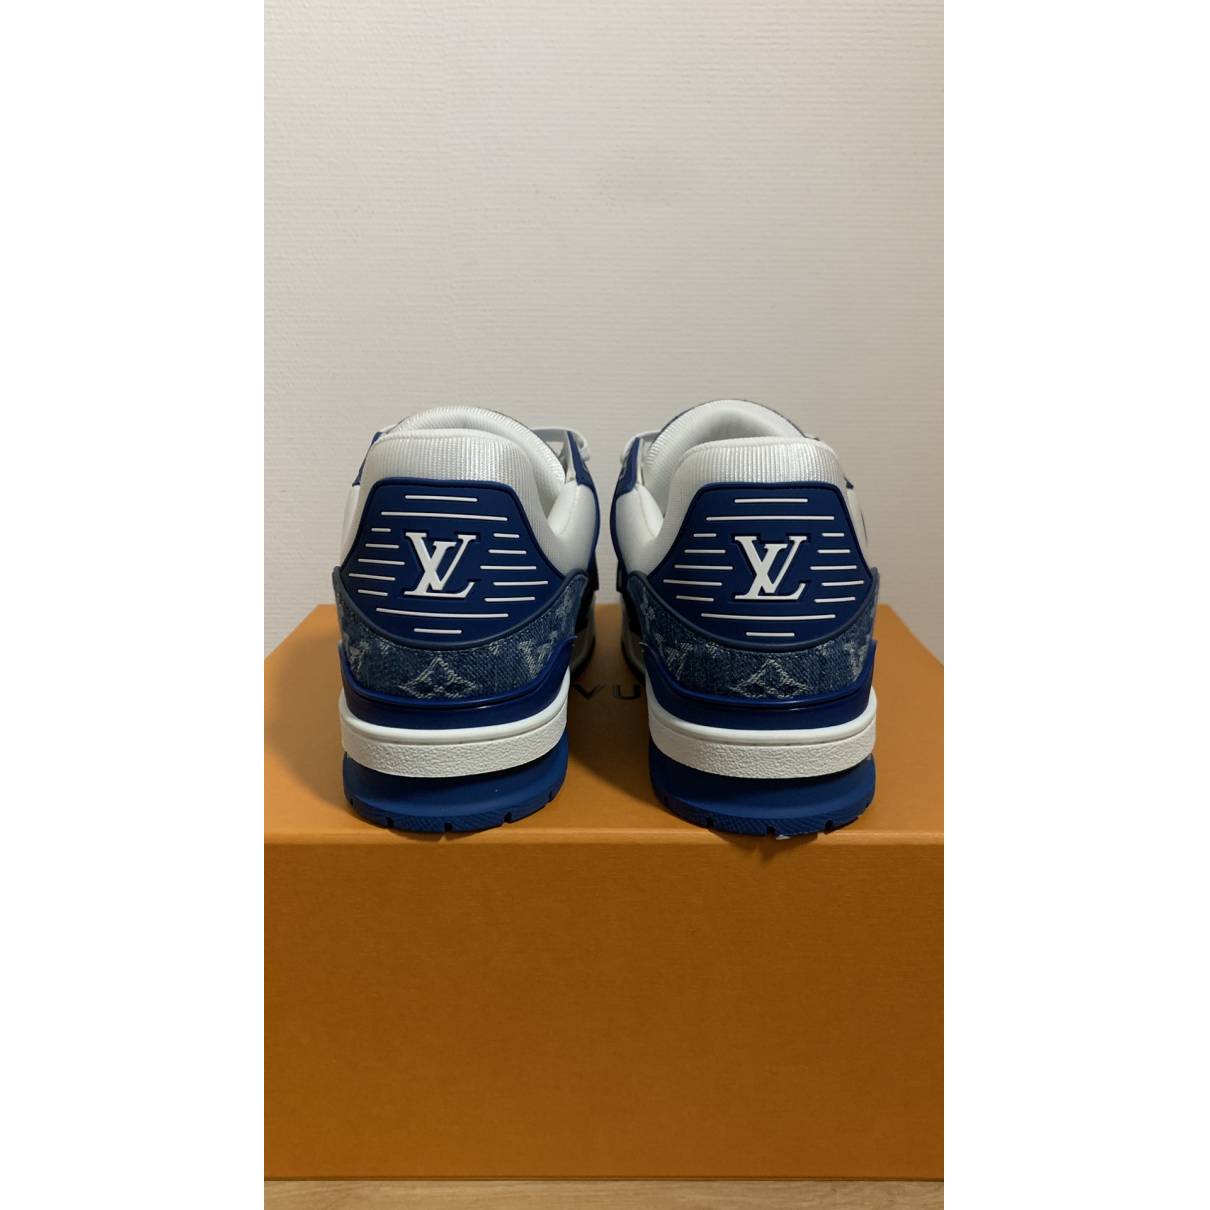 Lv trainer low trainers Louis Vuitton Blue size 9 UK in Other - 28996280